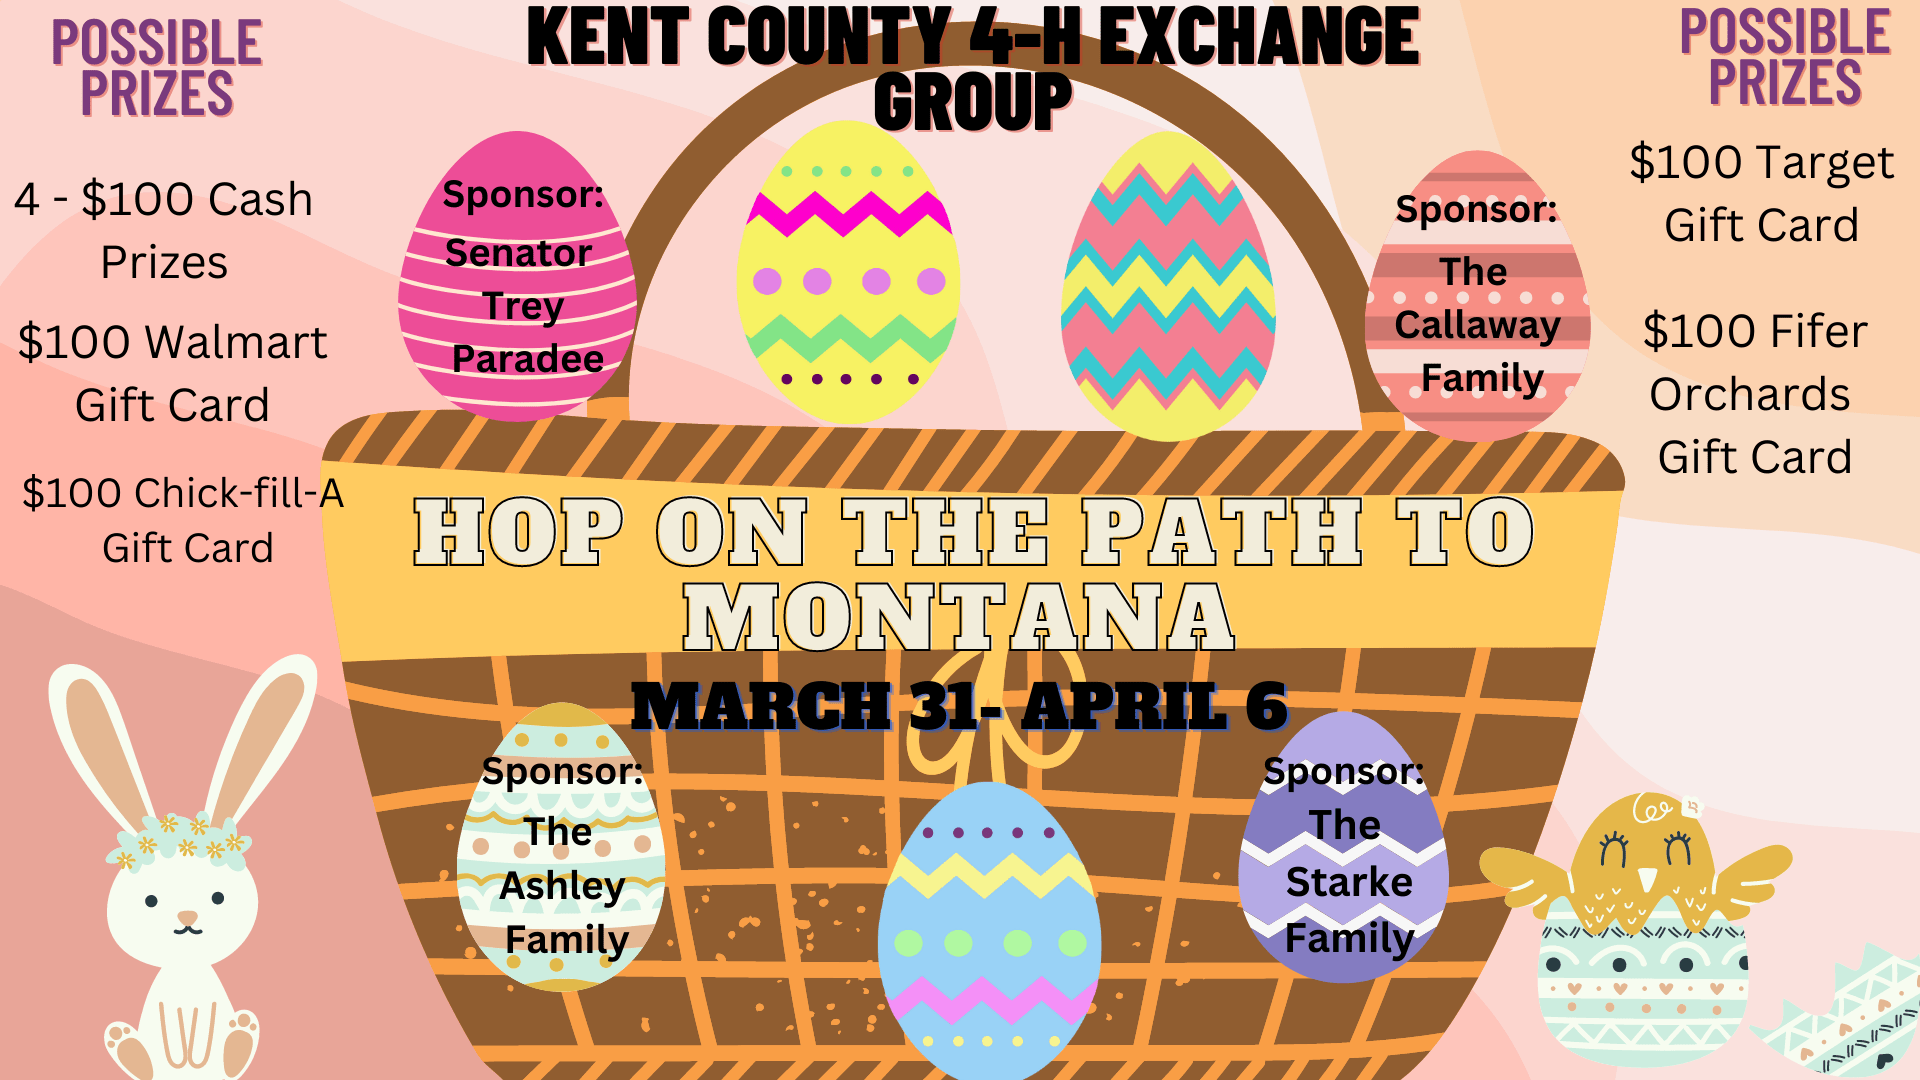 Kent County 4-H Exchange Group. Hop on the Path to Montana March 31-April 6. Possible Prizes; 4 - $100 Cash Prizes, $100 Walmart Gift Car, $100 Chick-Fil-A Gift Card, $100 Target Gift Card and $100 Fifer Orchards Gift Card. Sponsor: Senator Trey Paradee, Sponsor: The Callaway Family, Sponsor: The Ashley Family, Sponsor: The Starke Family